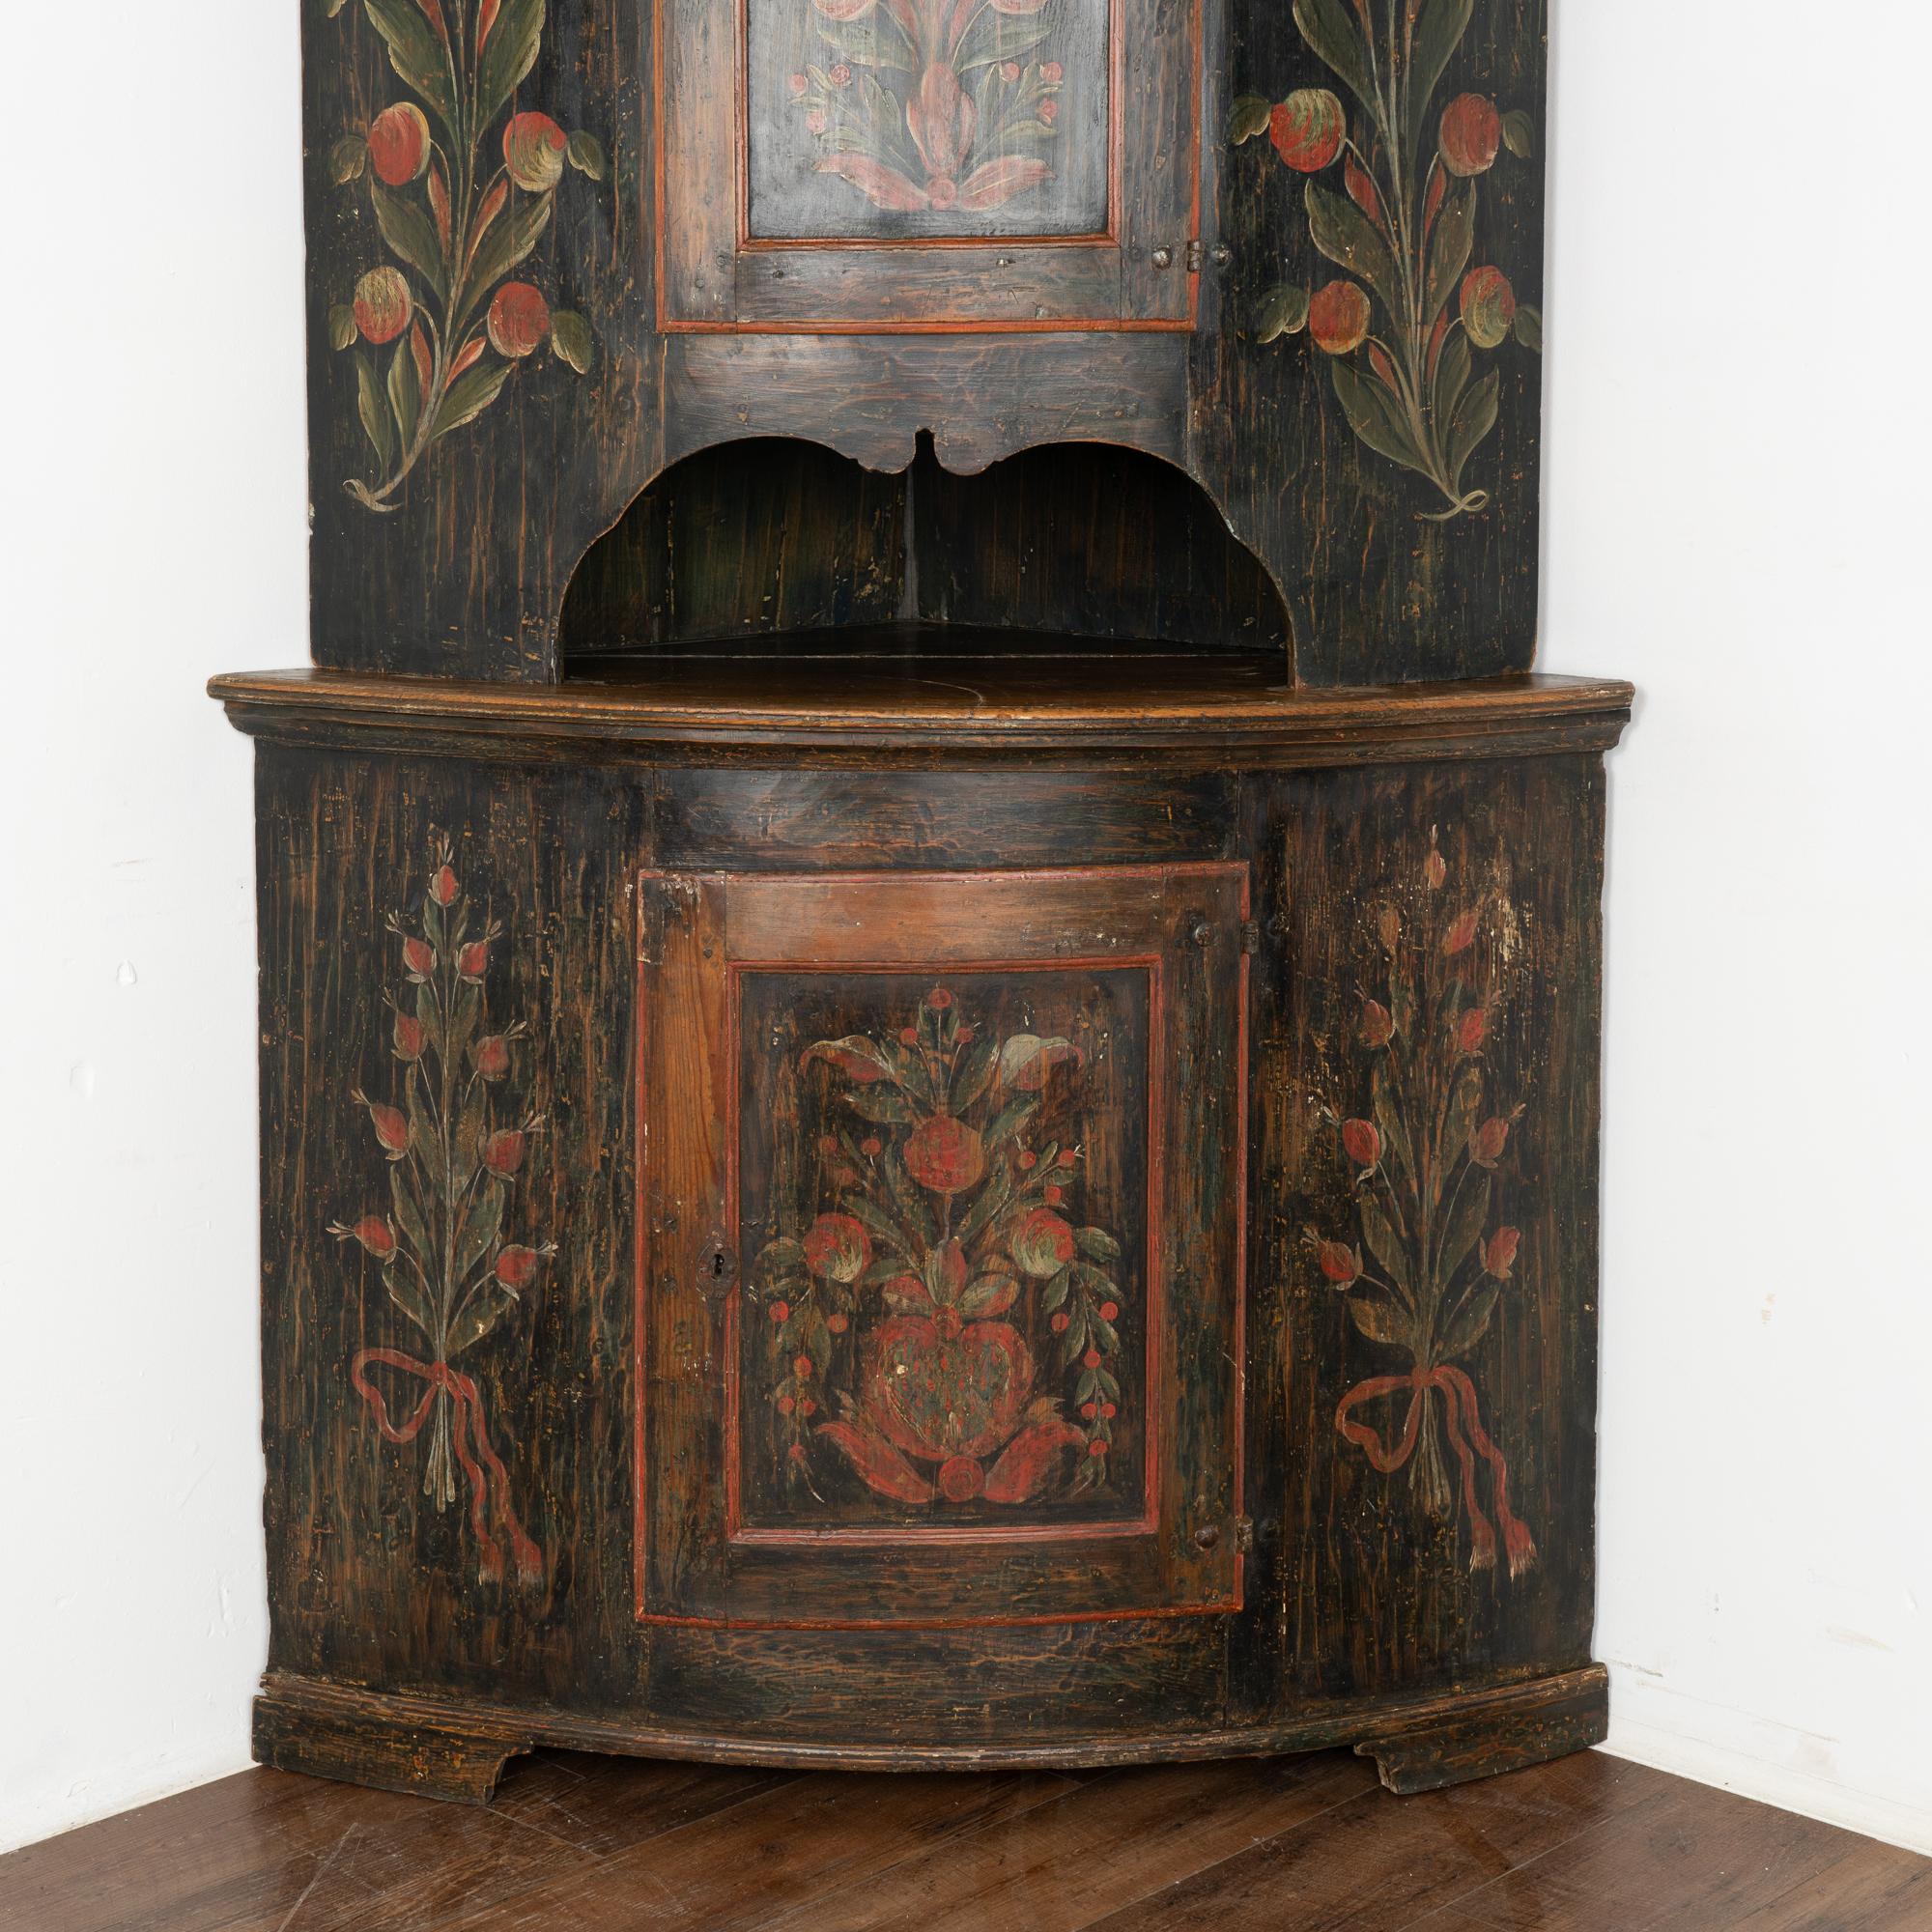 Original Black Painted Corner Cupboard Cabinet, Sweden dated 1818 In Good Condition For Sale In Round Top, TX